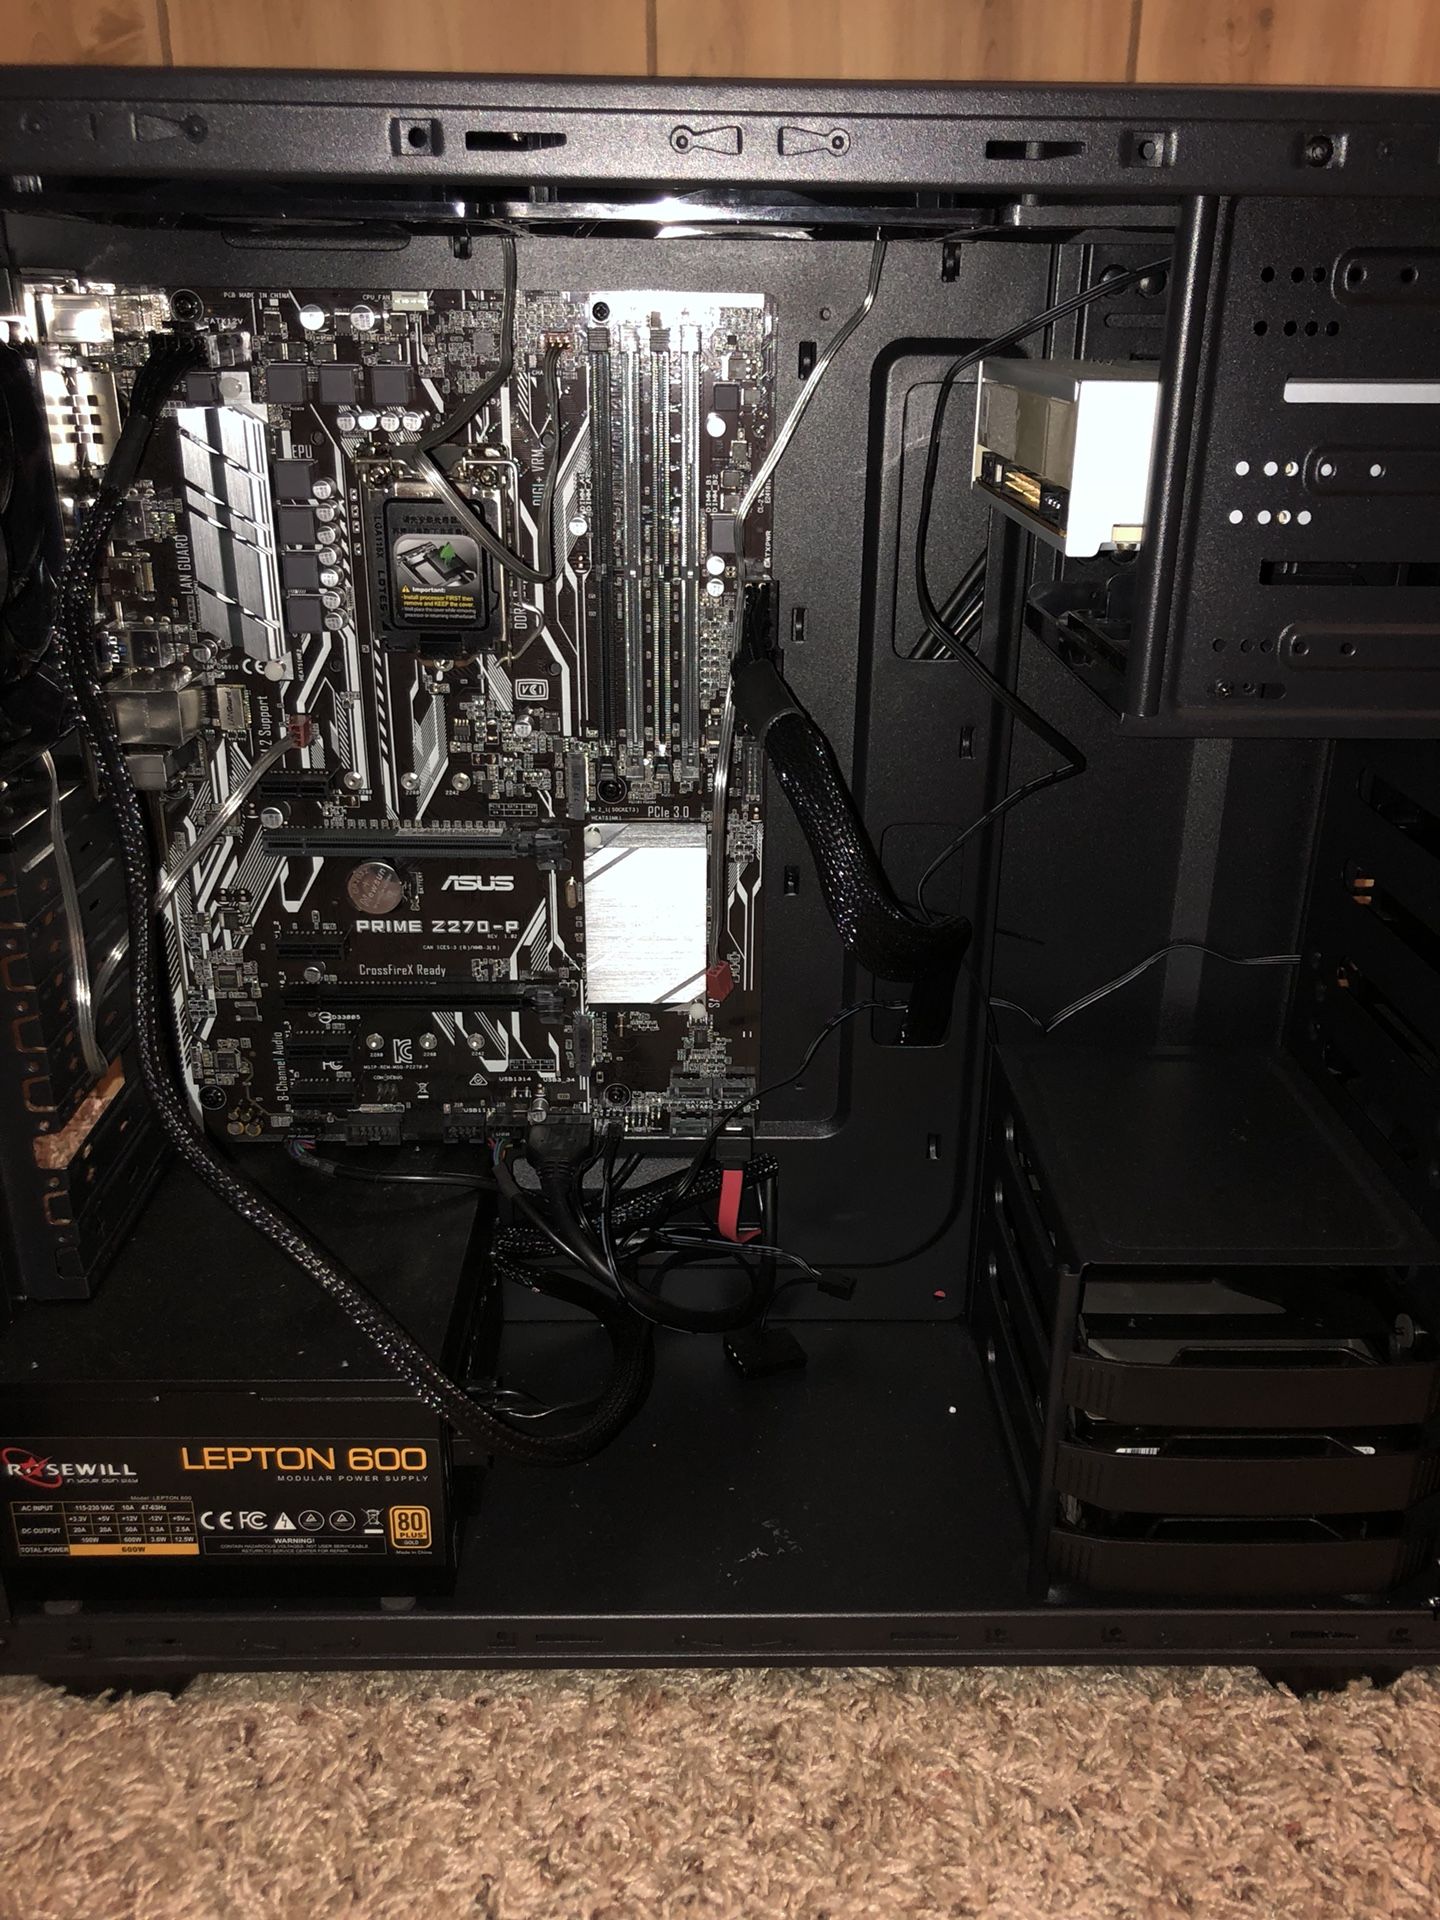 Pc case with motherboard,3 fans,cd player and power supply